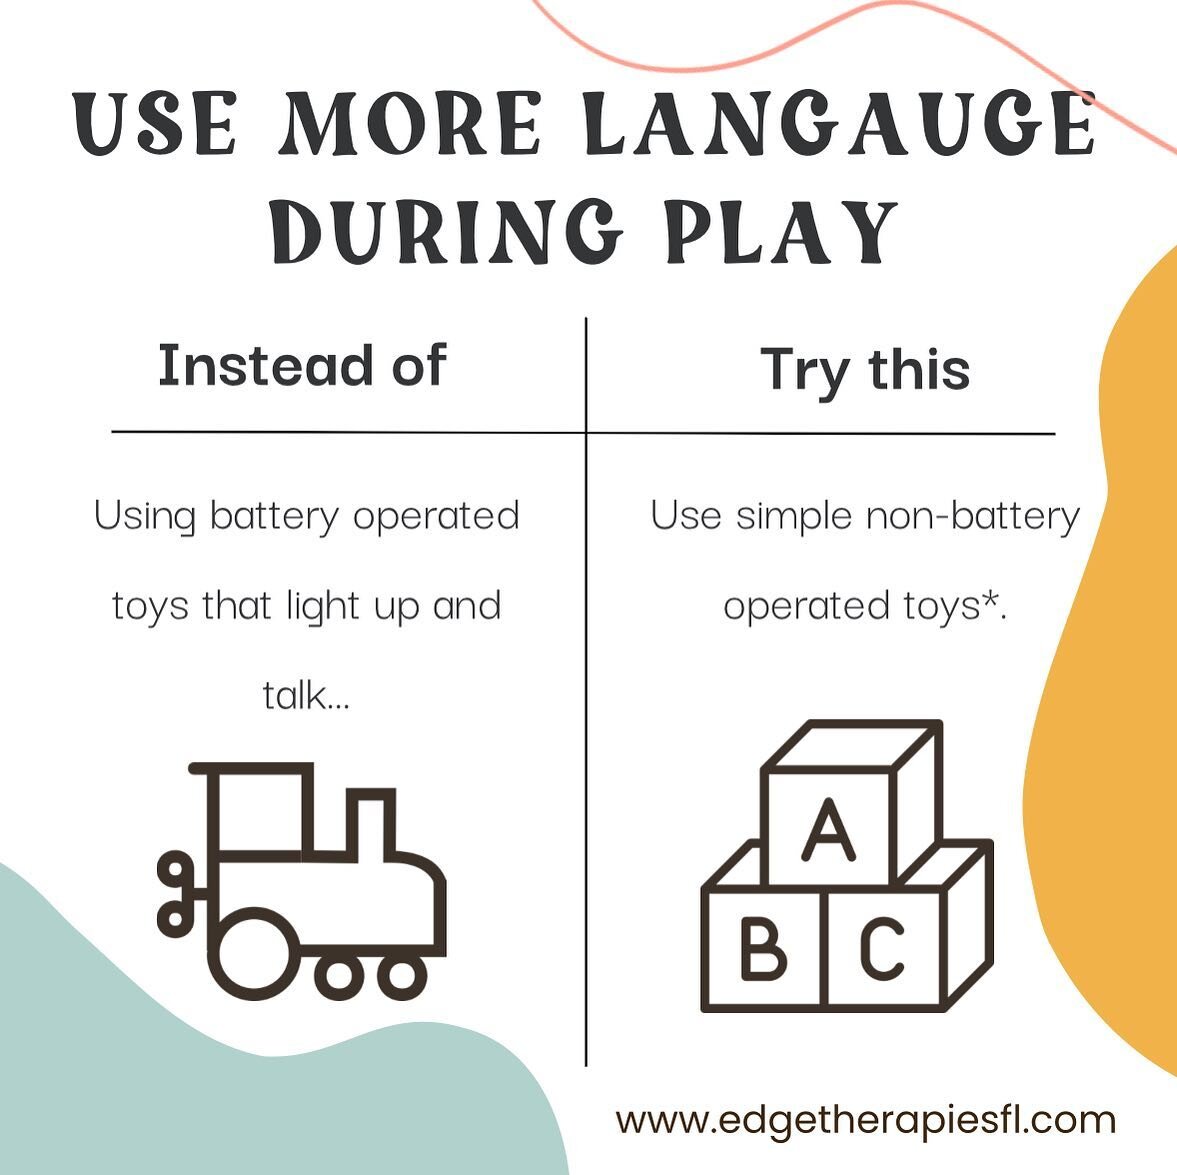 *LESS is MORE when is comes to building language when playing with your child.

Research shows that parents tend to use more words when they are using toys that are non-battery operated versus when using more complex, light up toys that talk for you.